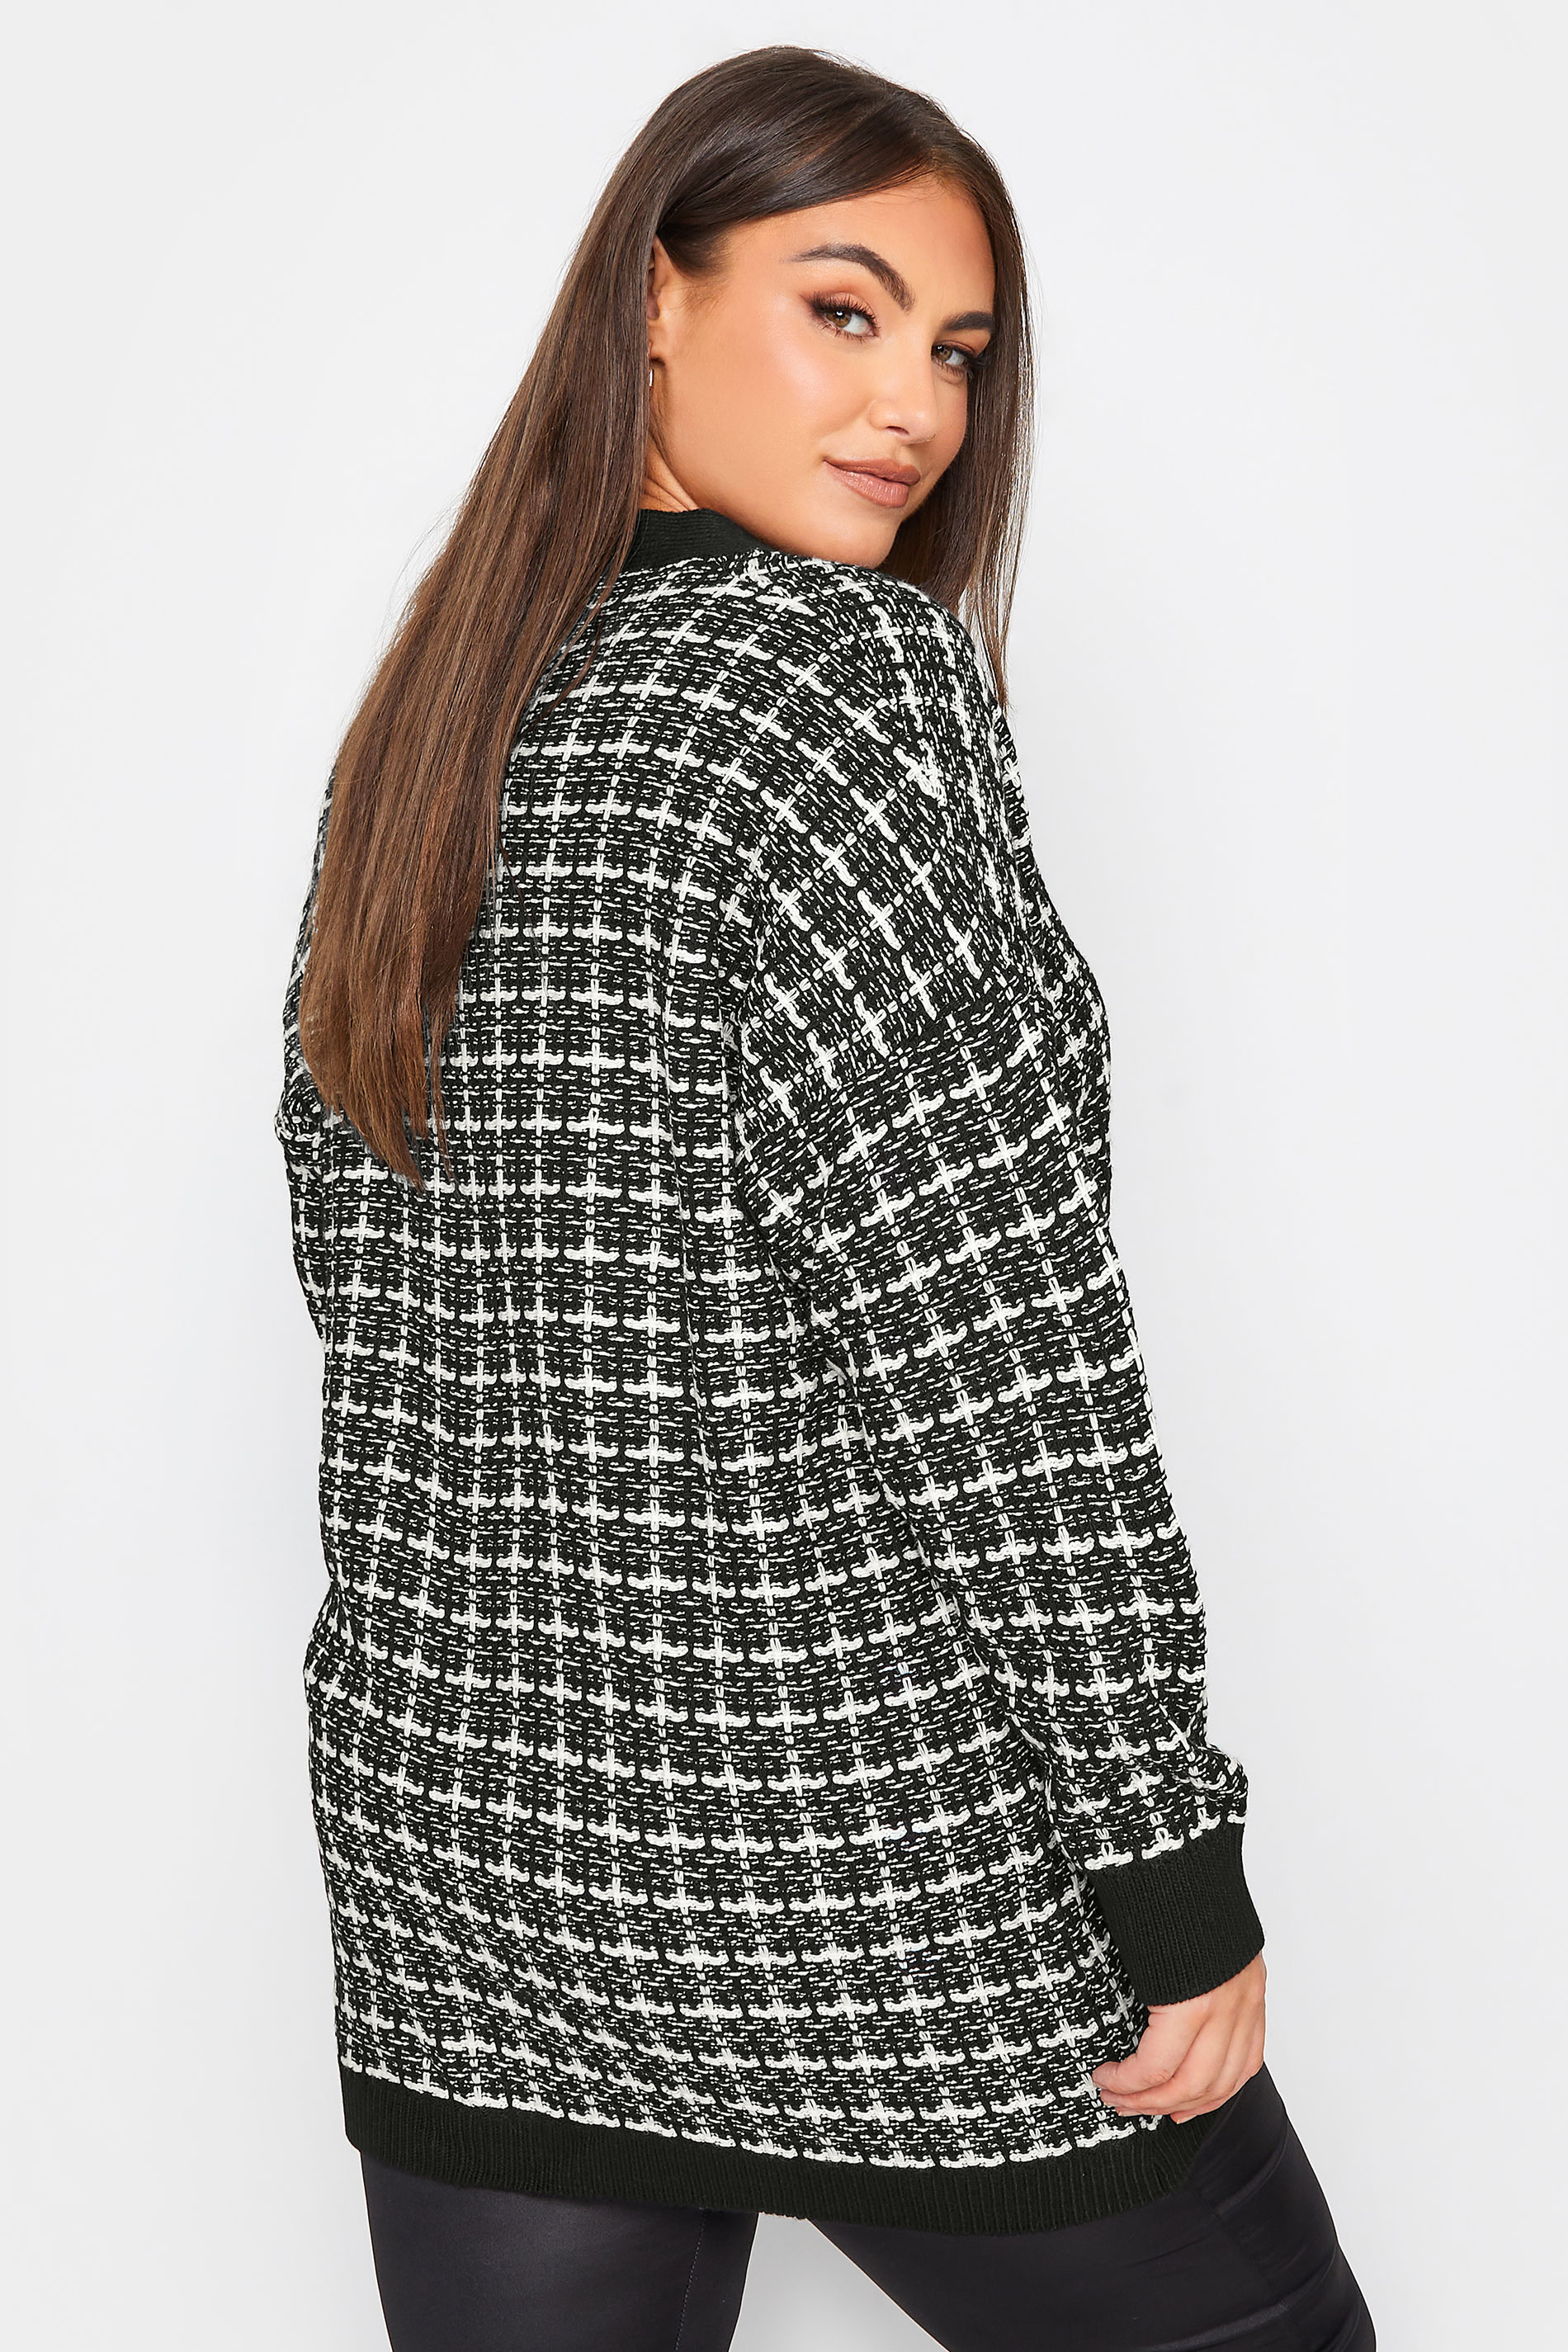 YOURS Curve Plus Size Black Boucle Cardigan | Yours Clothing  3